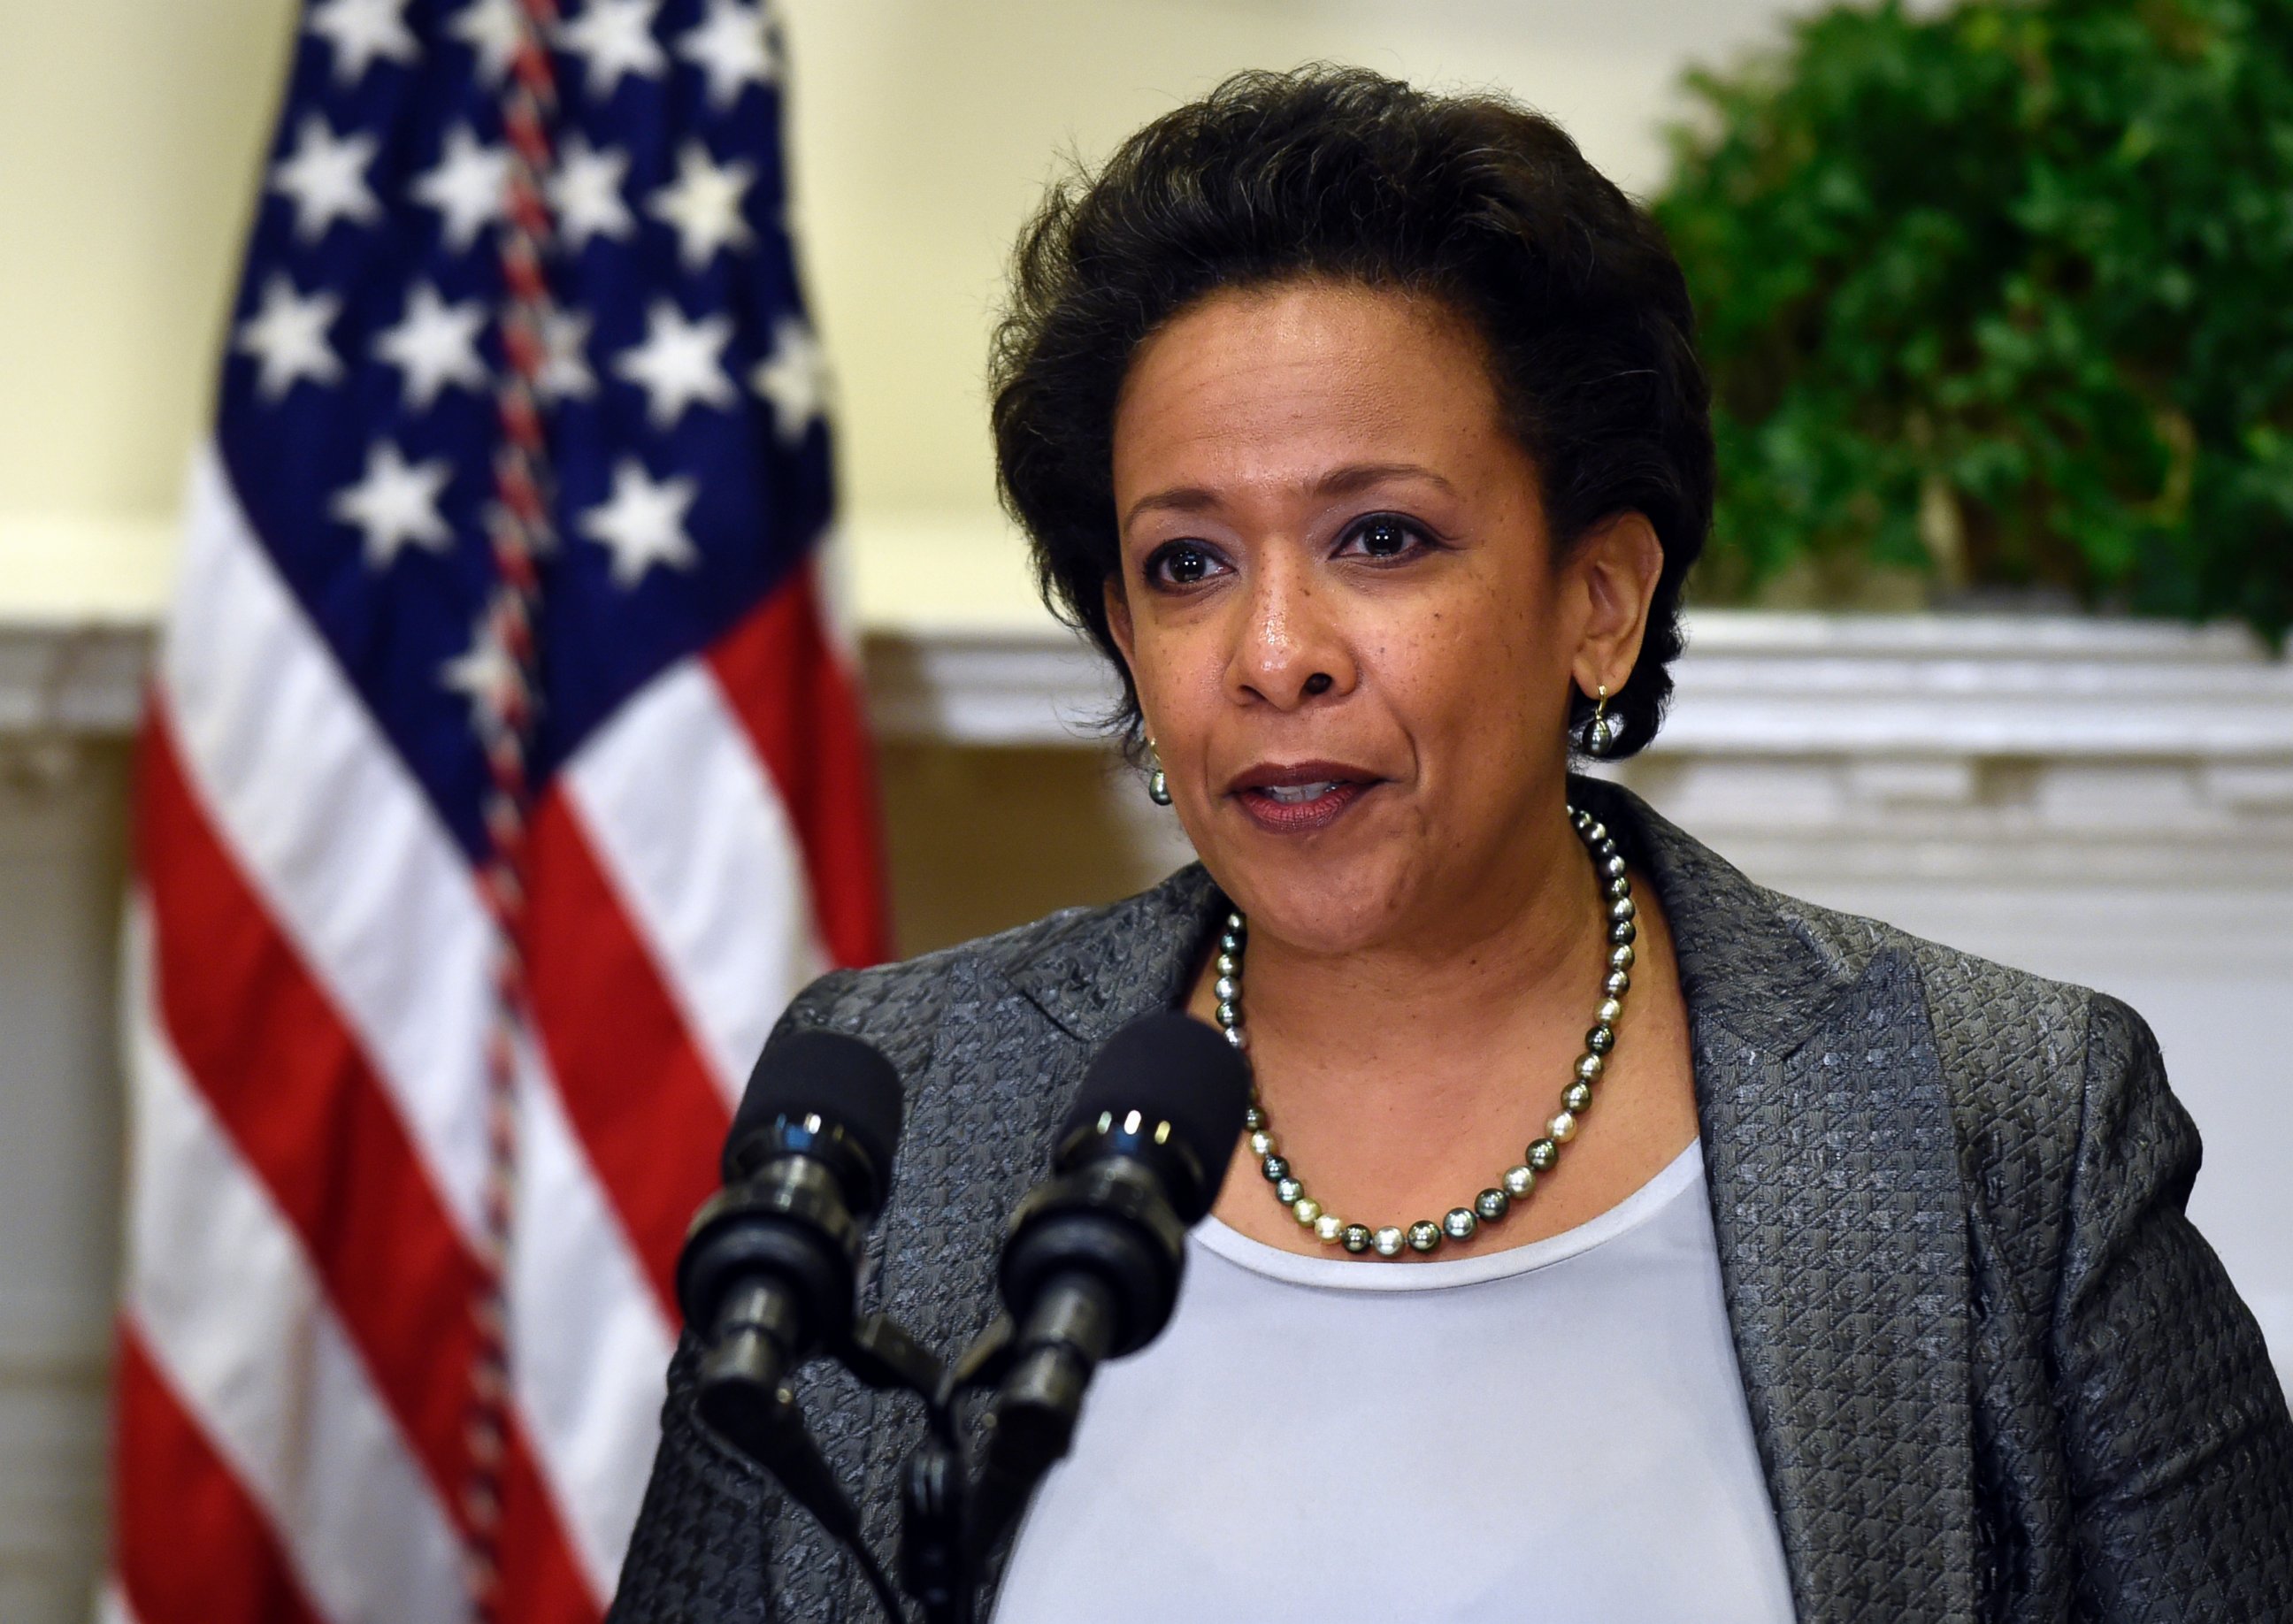 PHOTO: U.S. Attorney Loretta Lynch speaks in the Roosevelt Room of the White House in Washington, Nov. 8, 2014, after President Barack Obama nominated her to be the next Attorney General succeeding Eric Holder. 